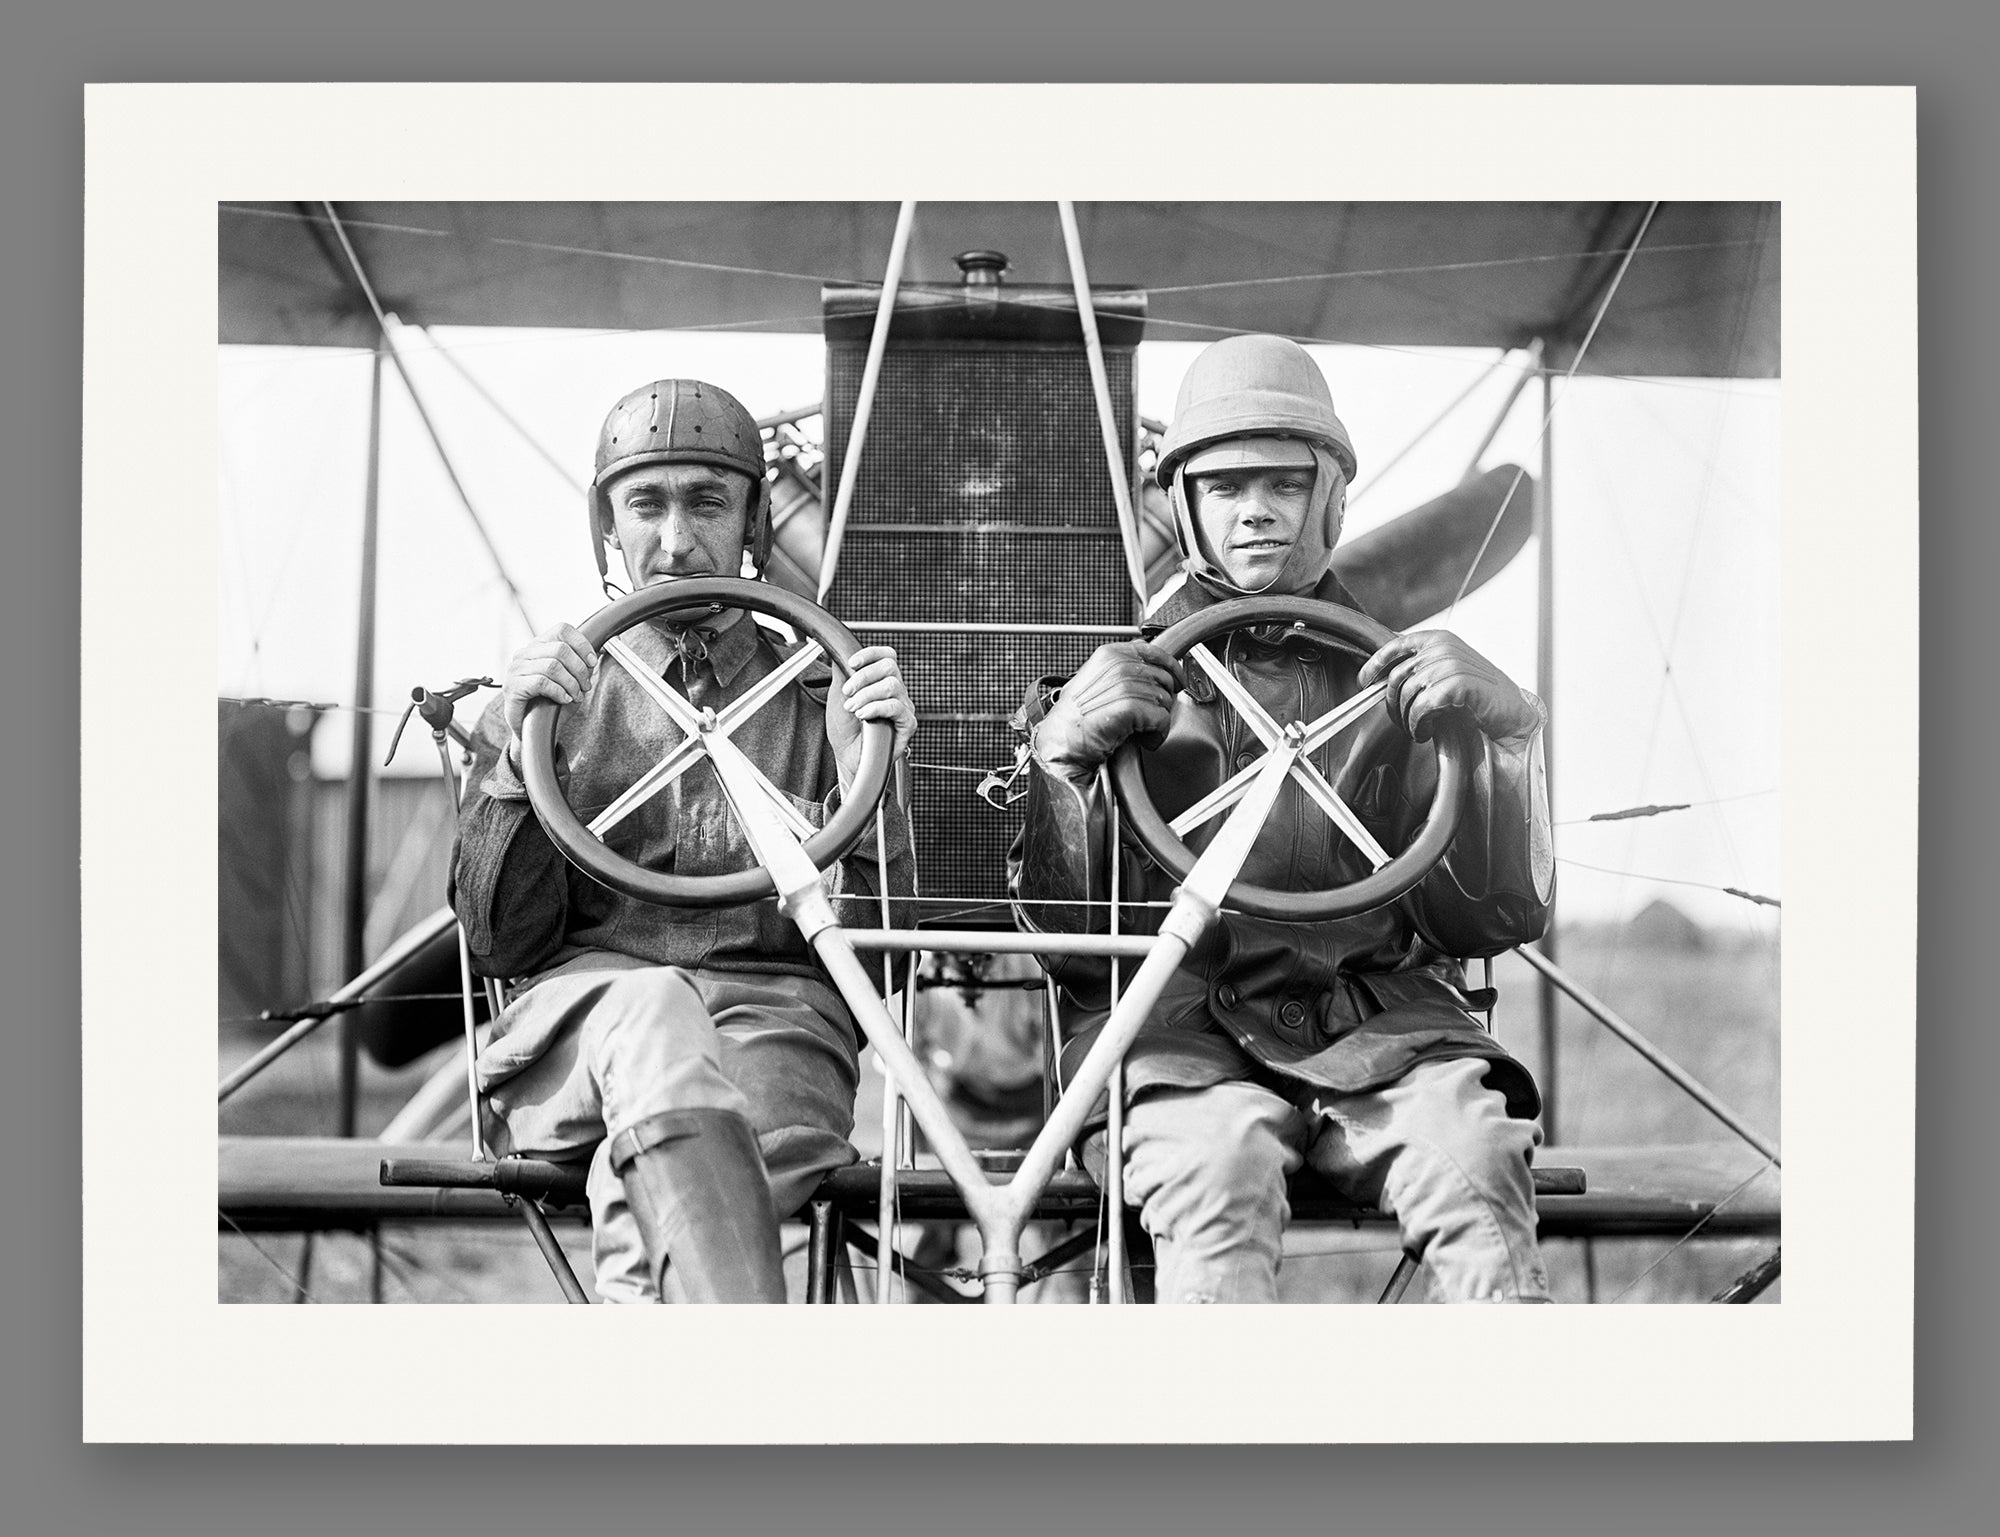 A fine art print on paper of a vintage photograph taken at College Park Aviation Field